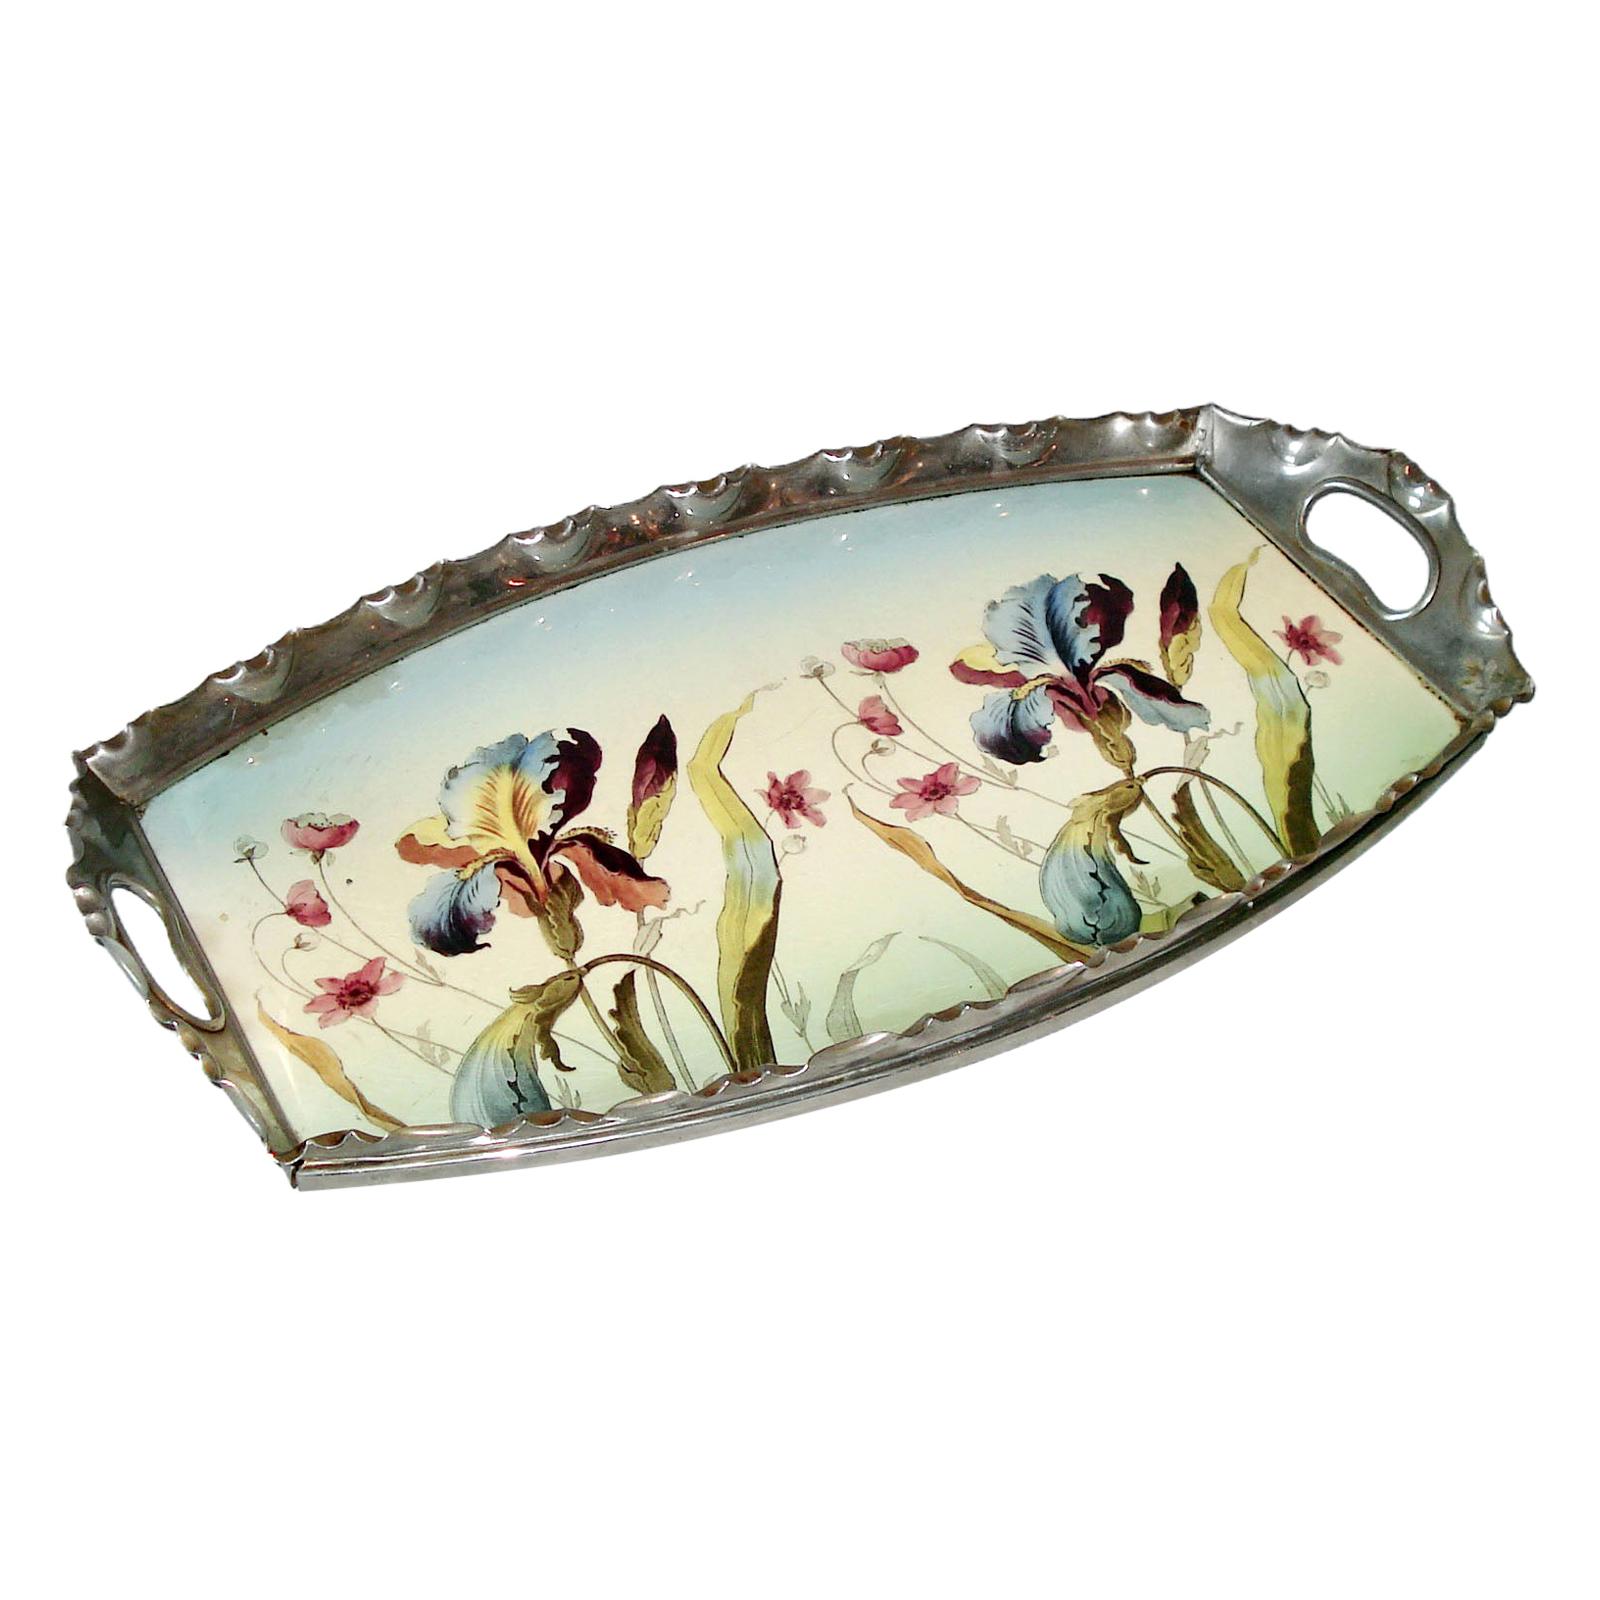 Art Nouveau Porcelain and Pewter Tray by Max Dannhorn, Villeroy & Boch